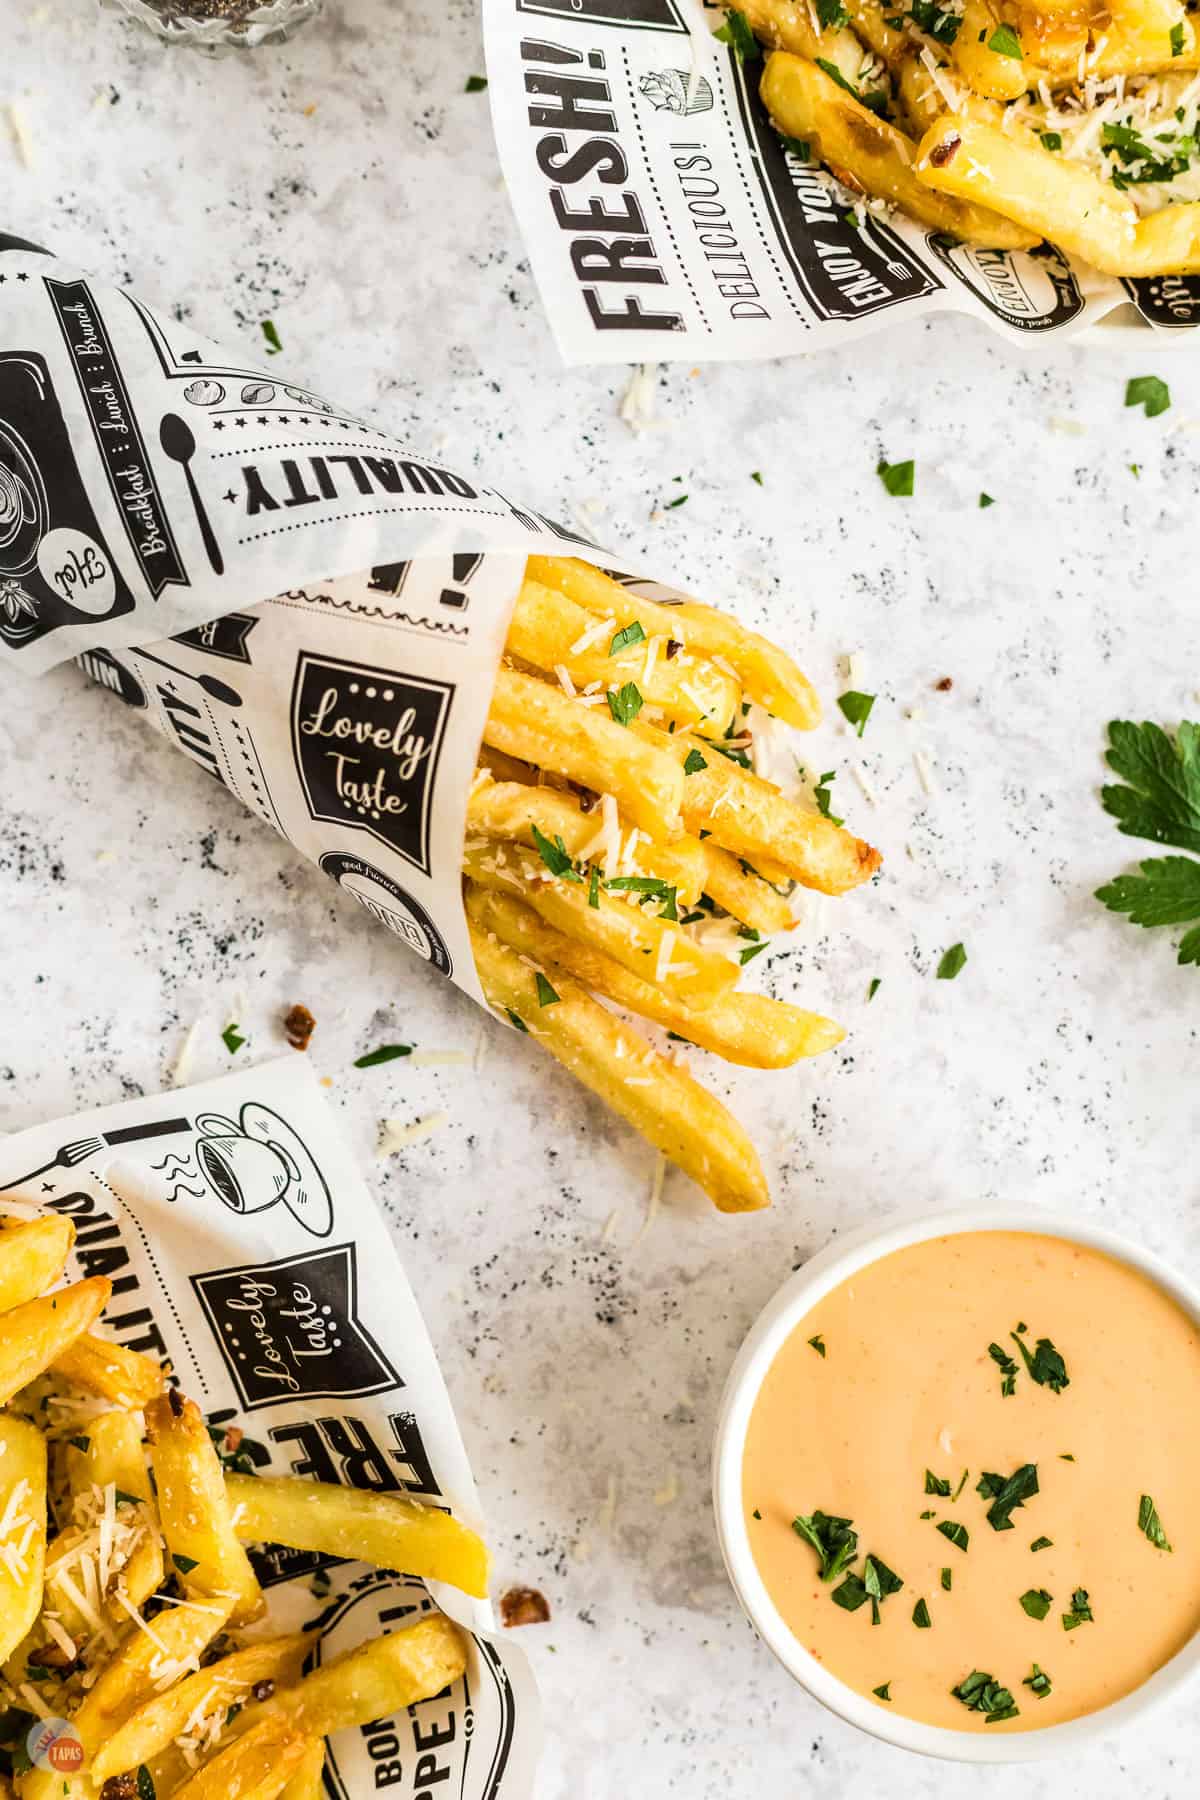 cone of fries with dipping sauce